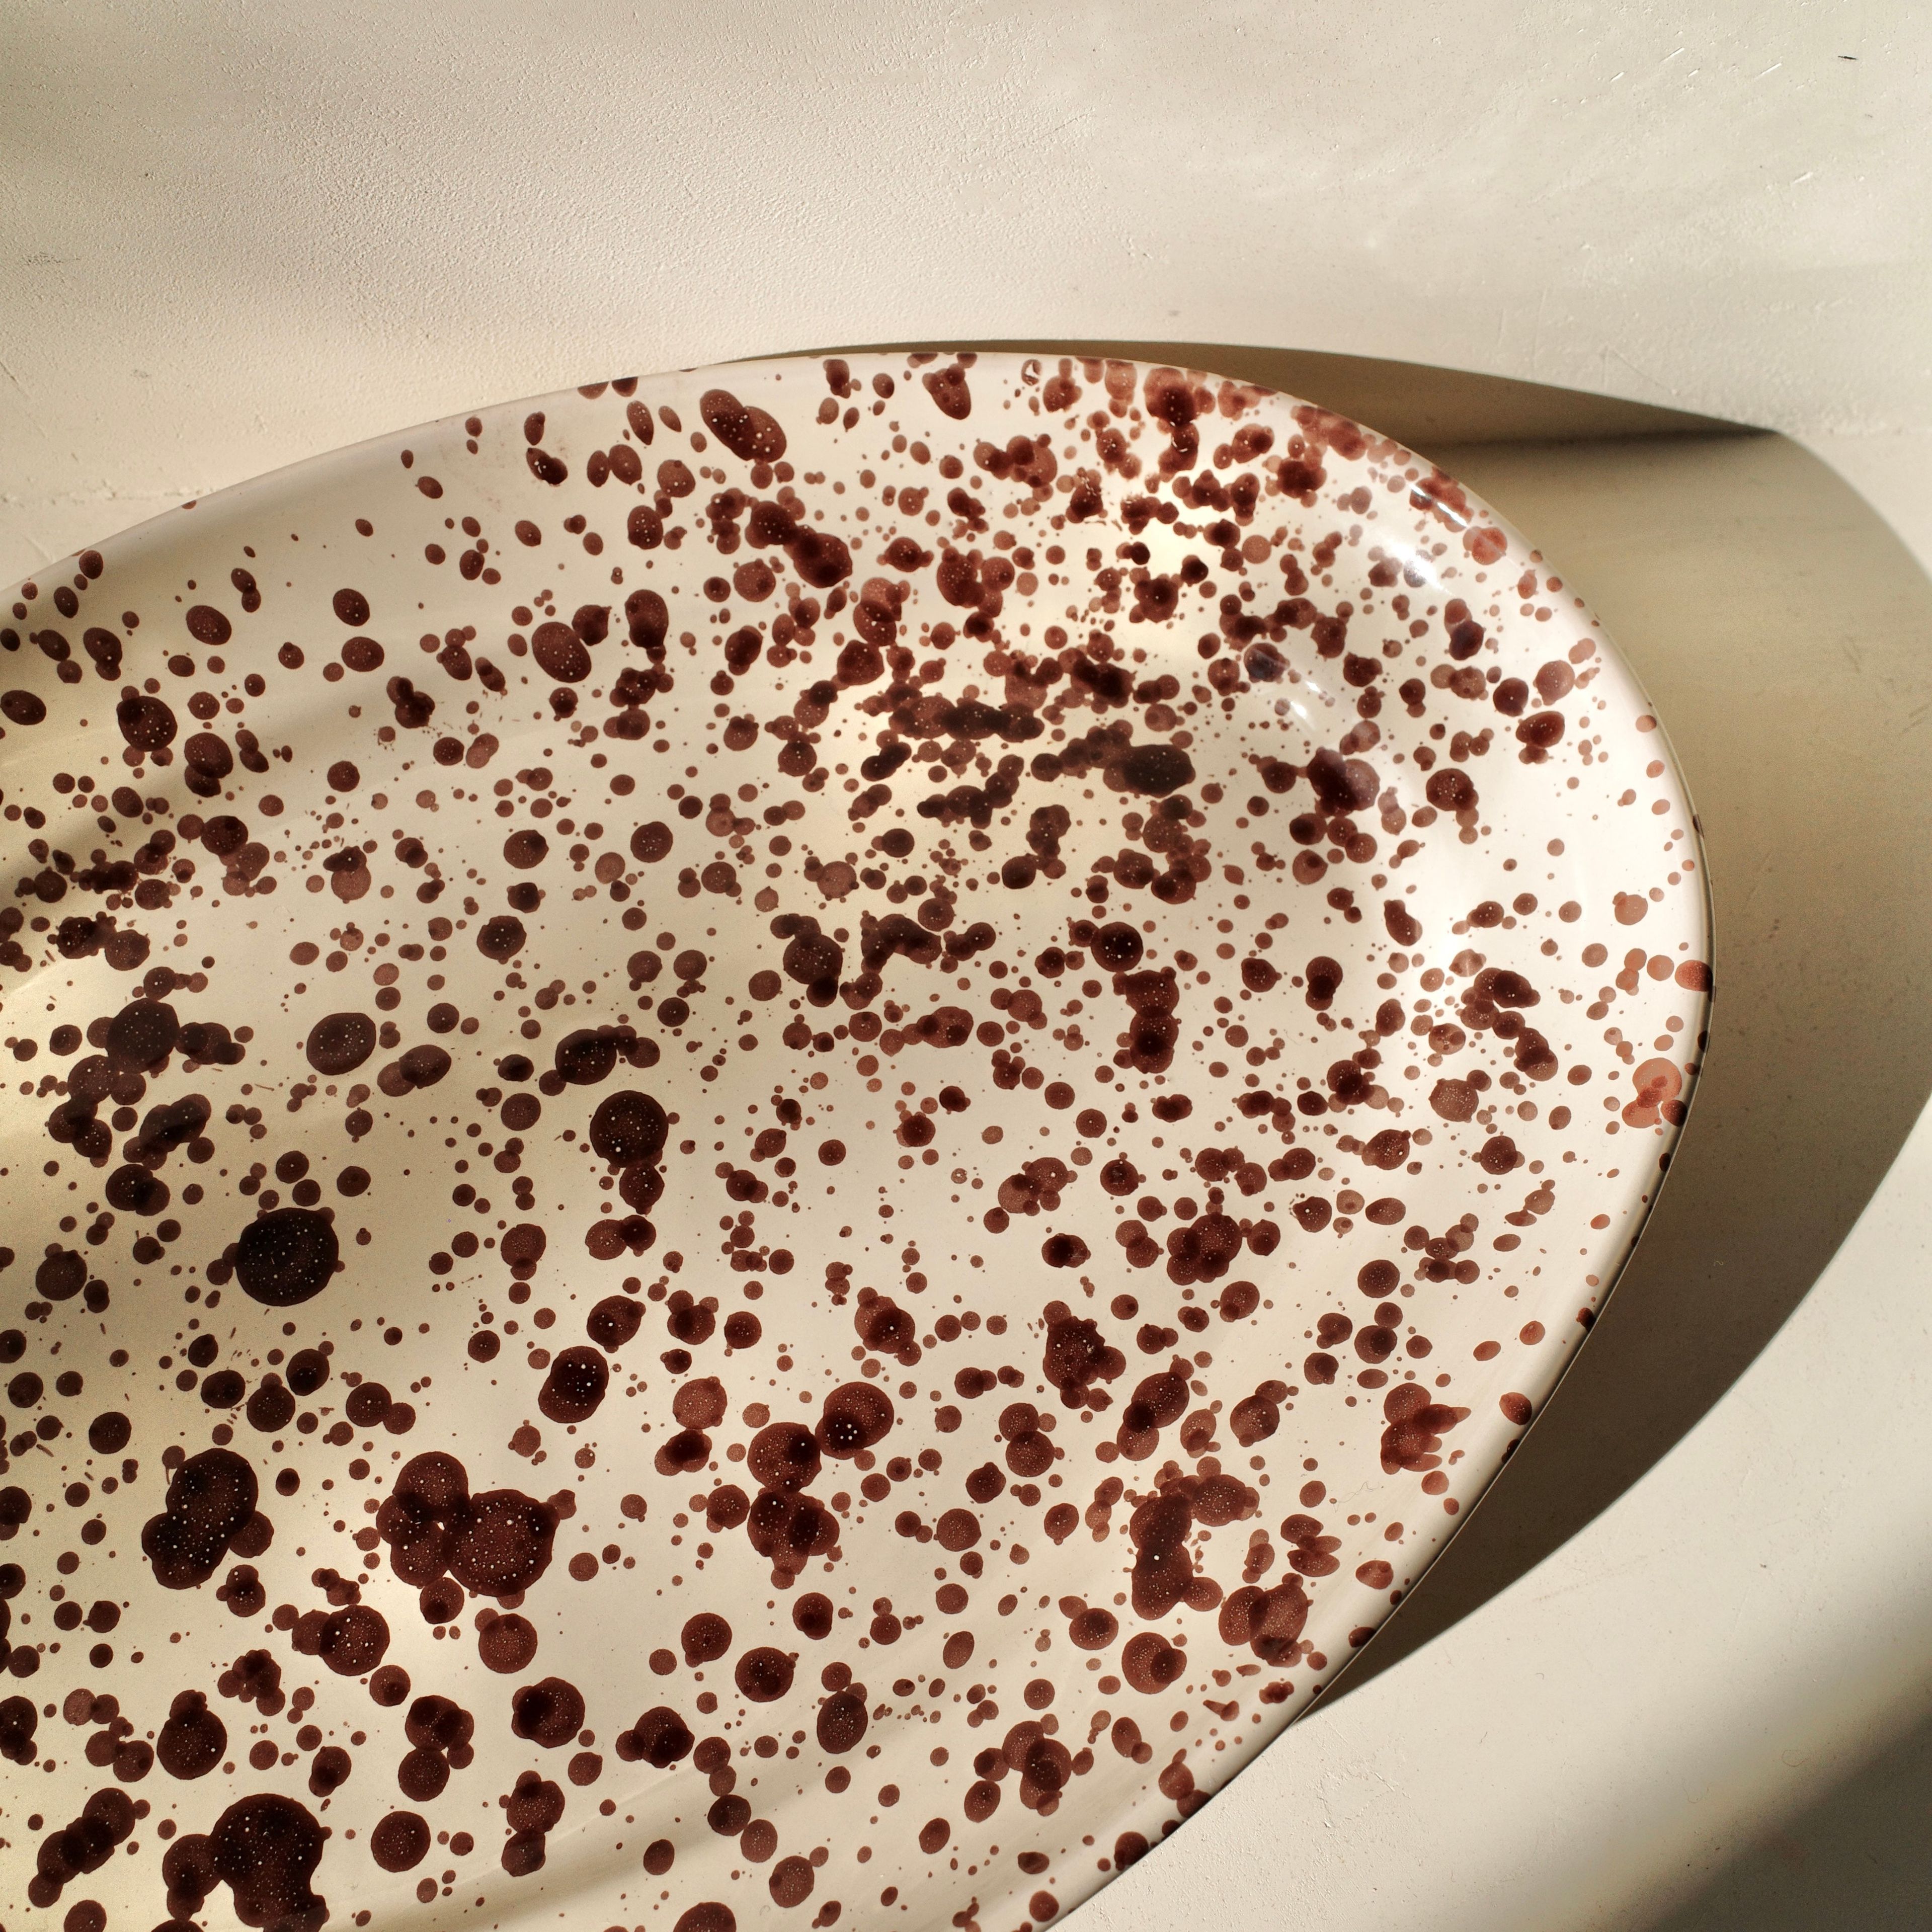 Large Splatter Oval Plate by Fasanoceramiche